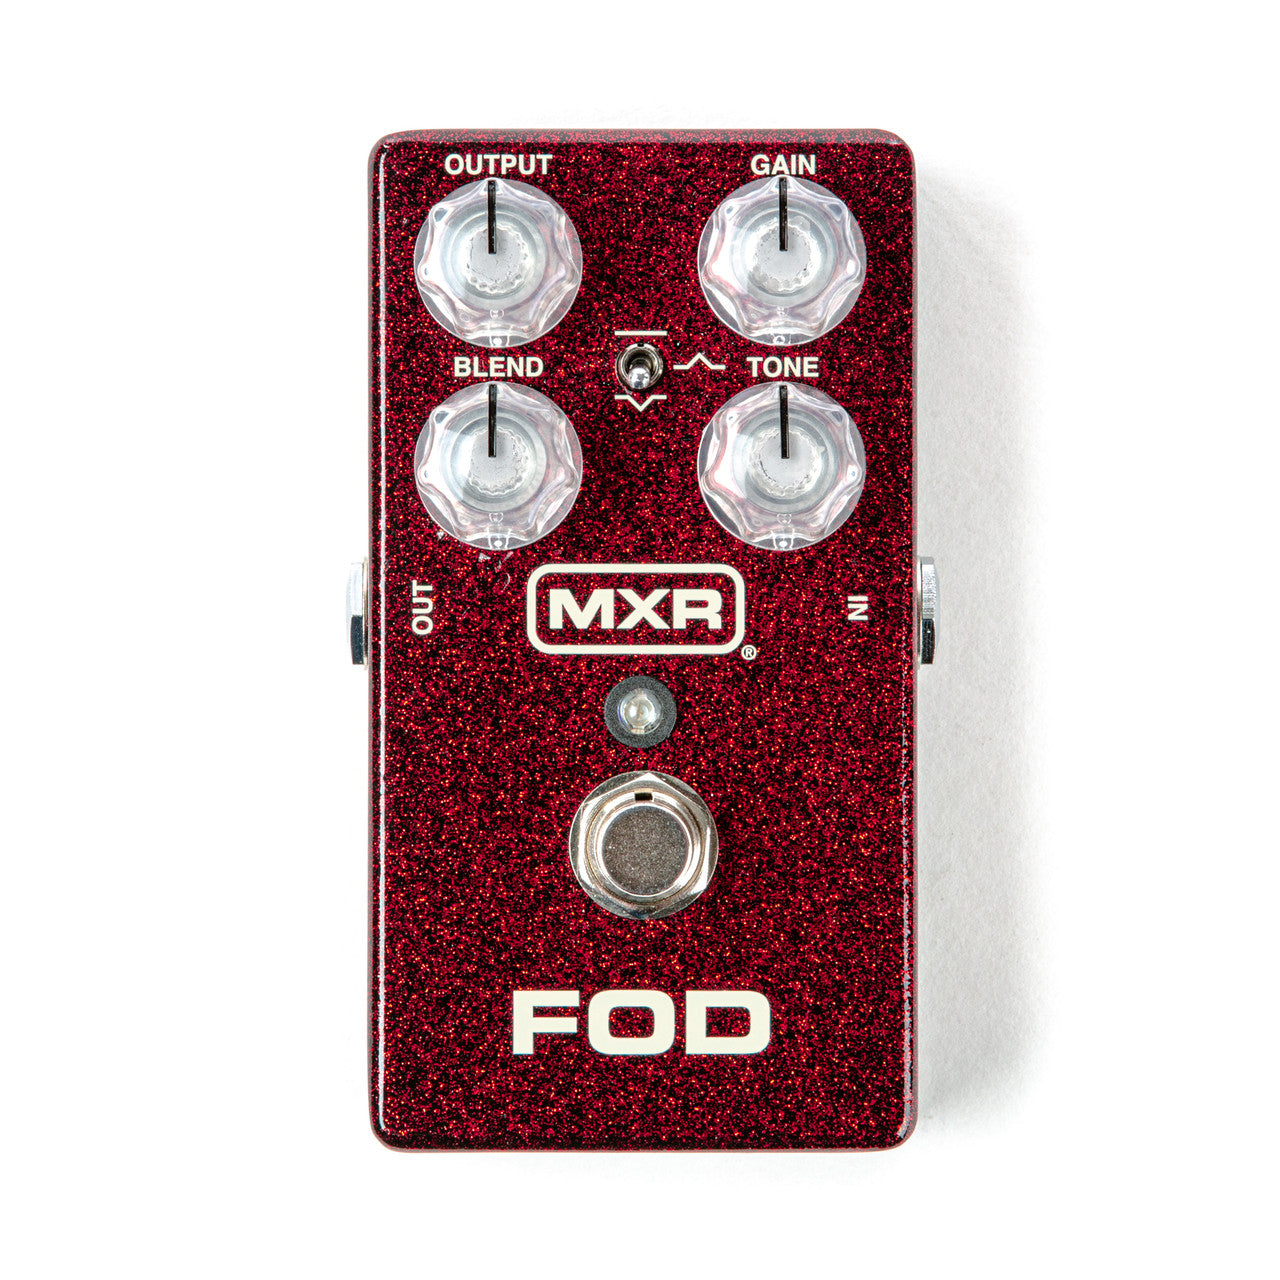 Dunlop MXR M251 FOD Drive Overdrive Guitar Effect Pedal + FREE Supro 20' Cable